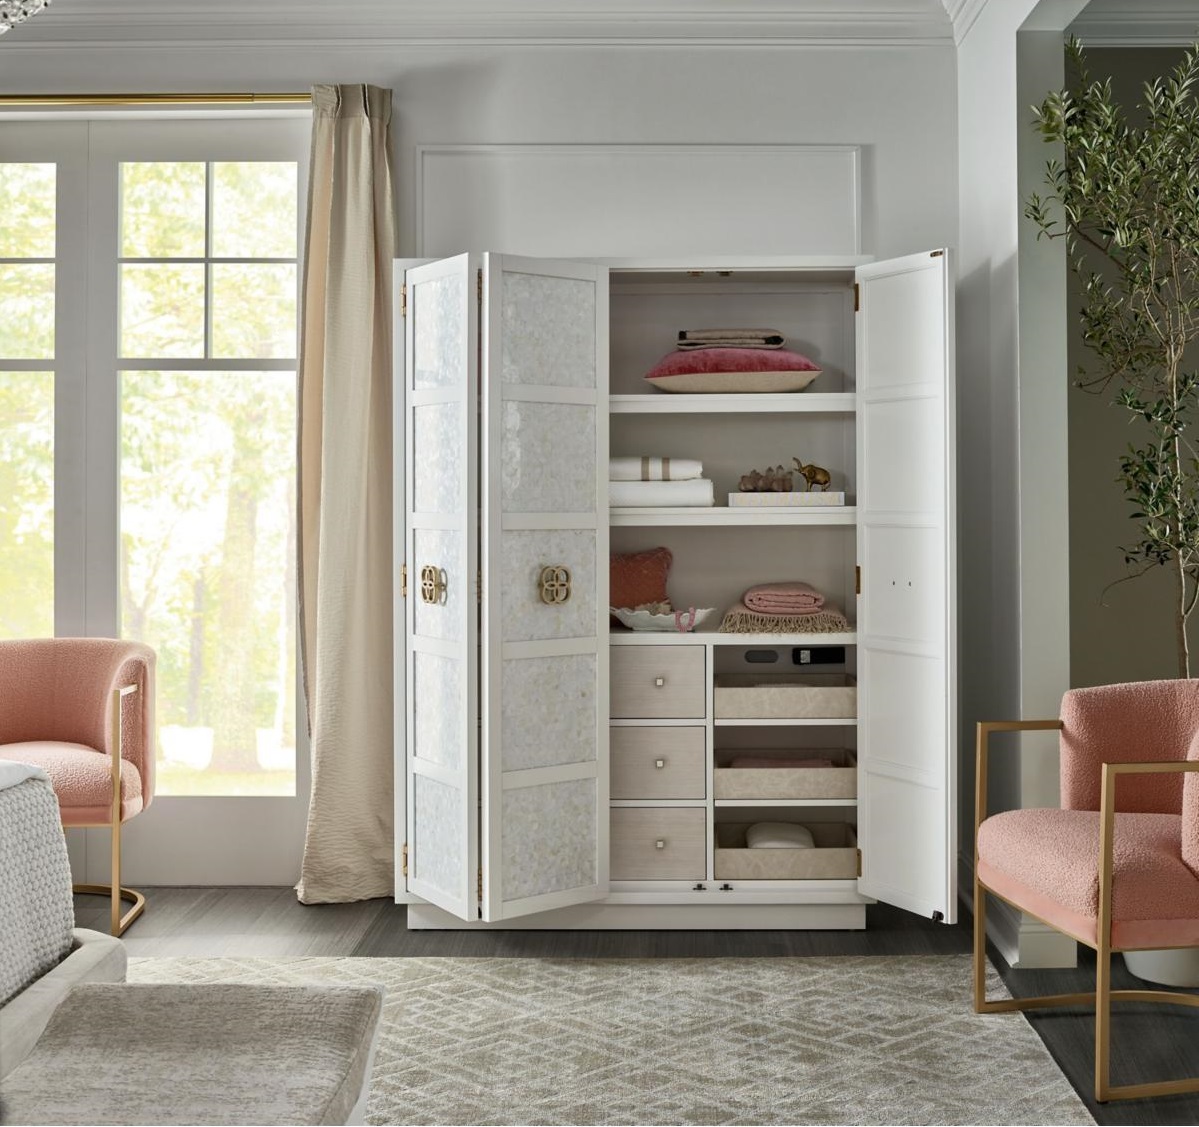 Declutter Your Home with These Storage Furniture Ideas